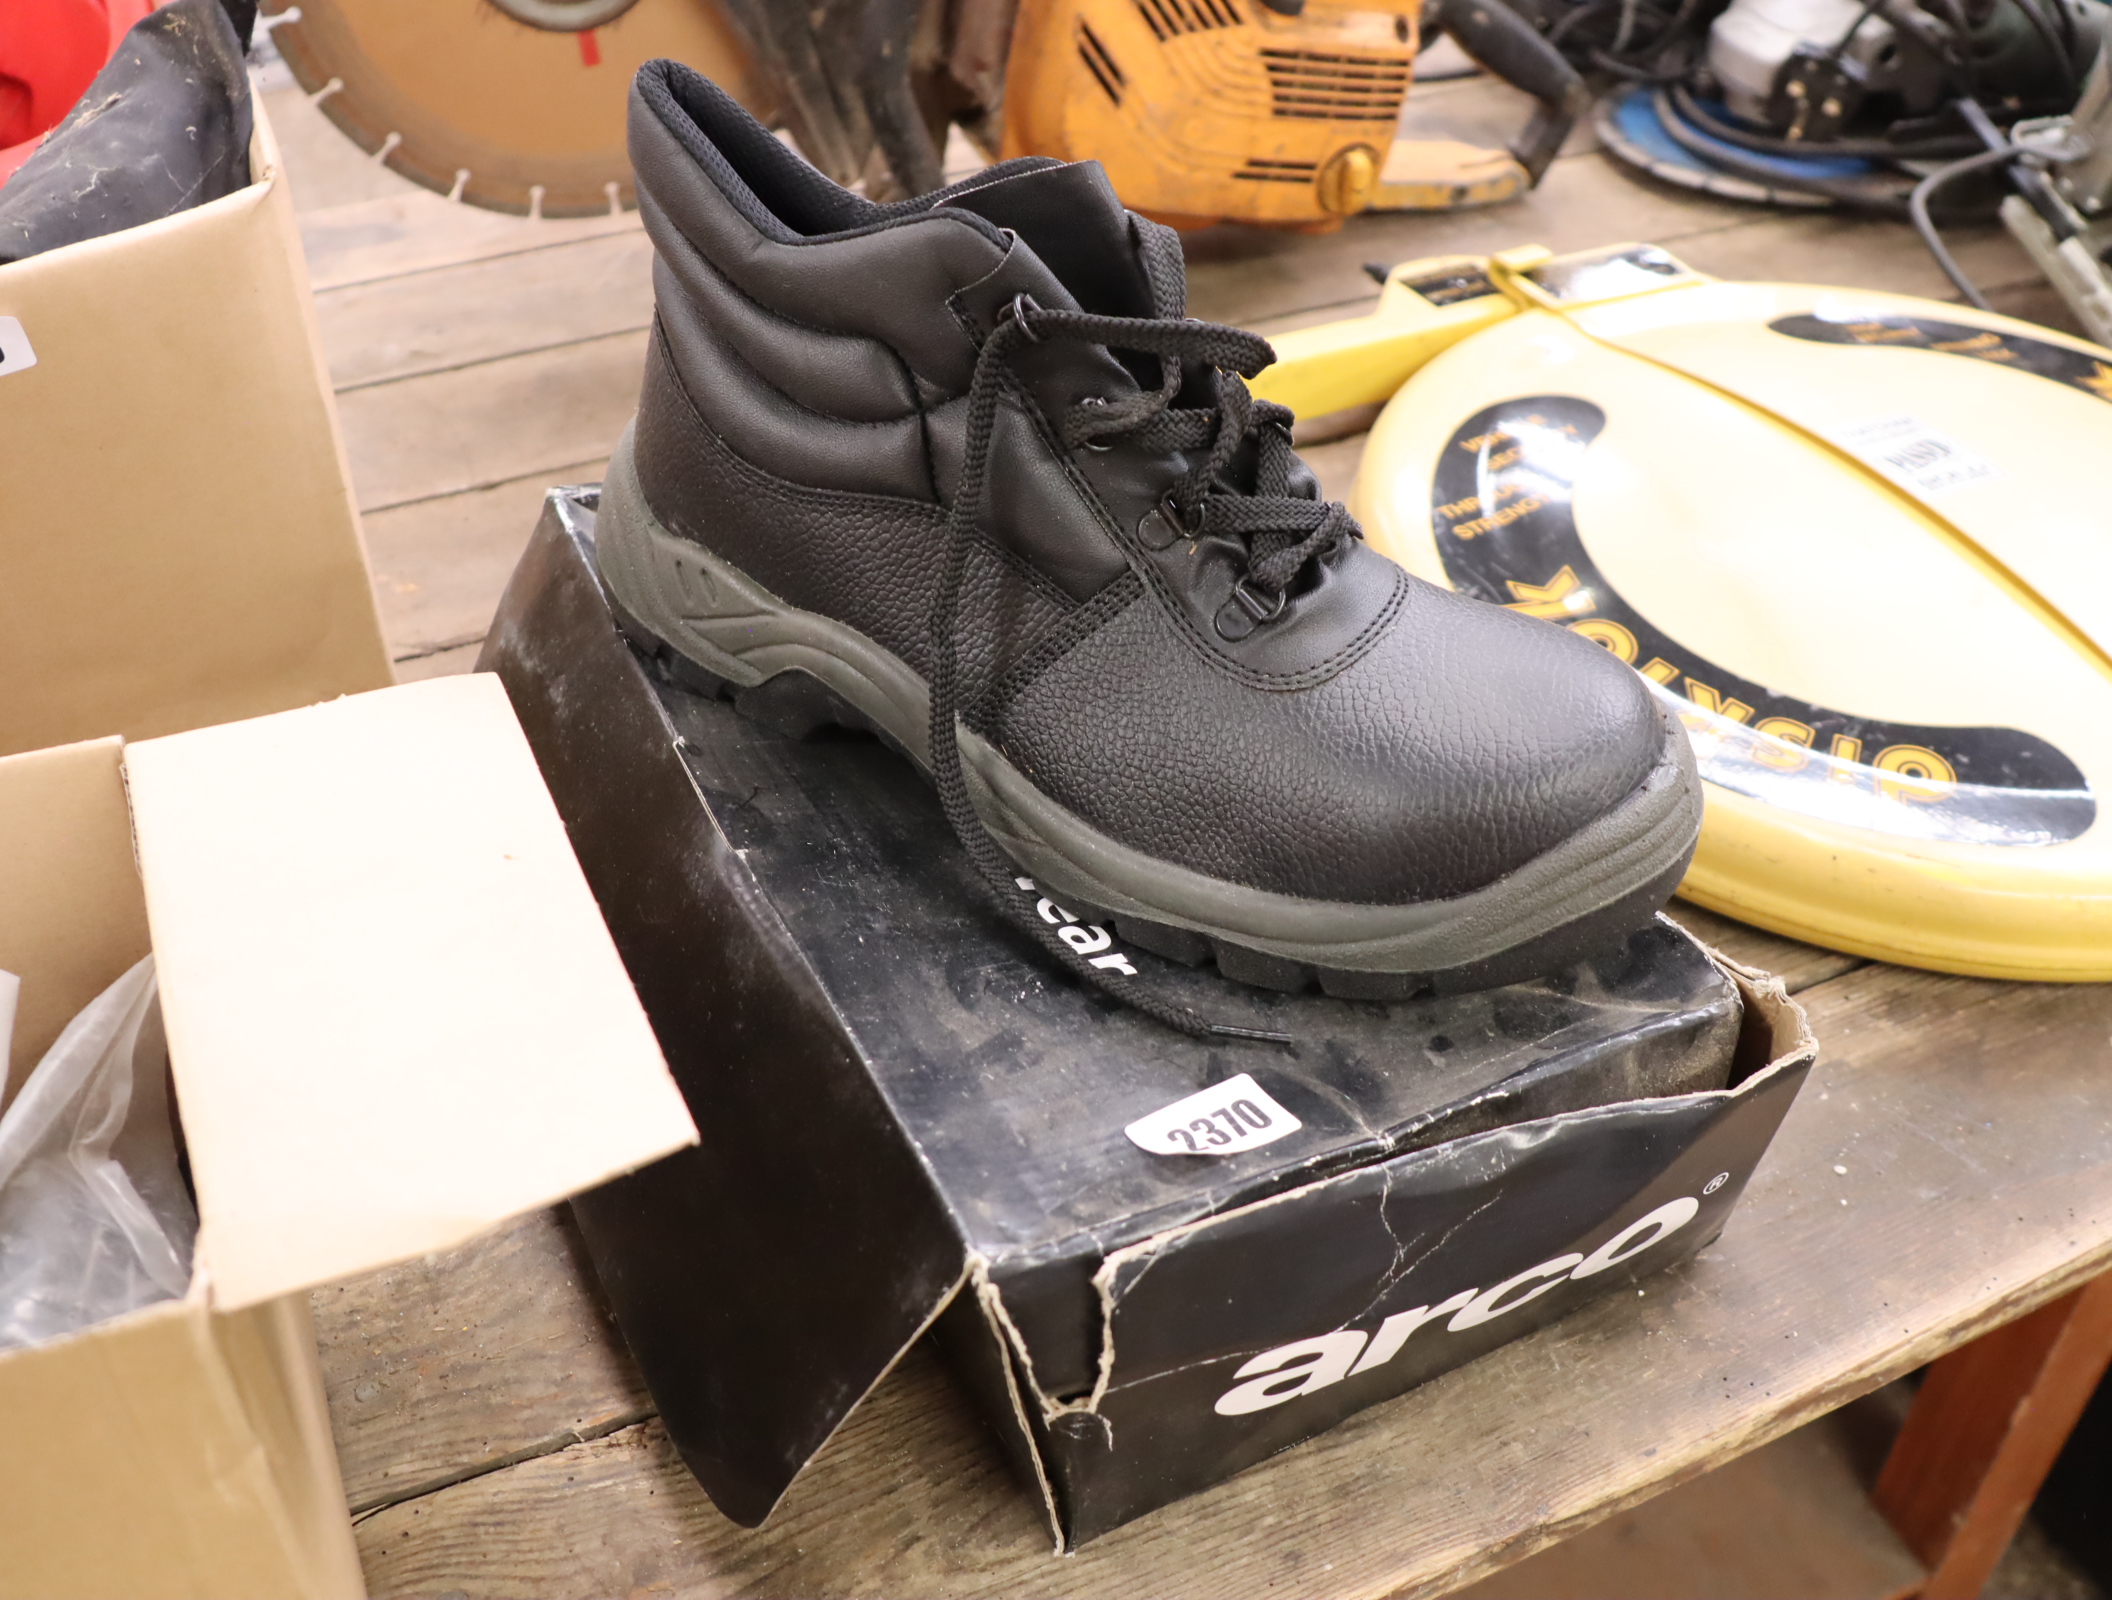 Pair of echo safety boots in black, size UK 11